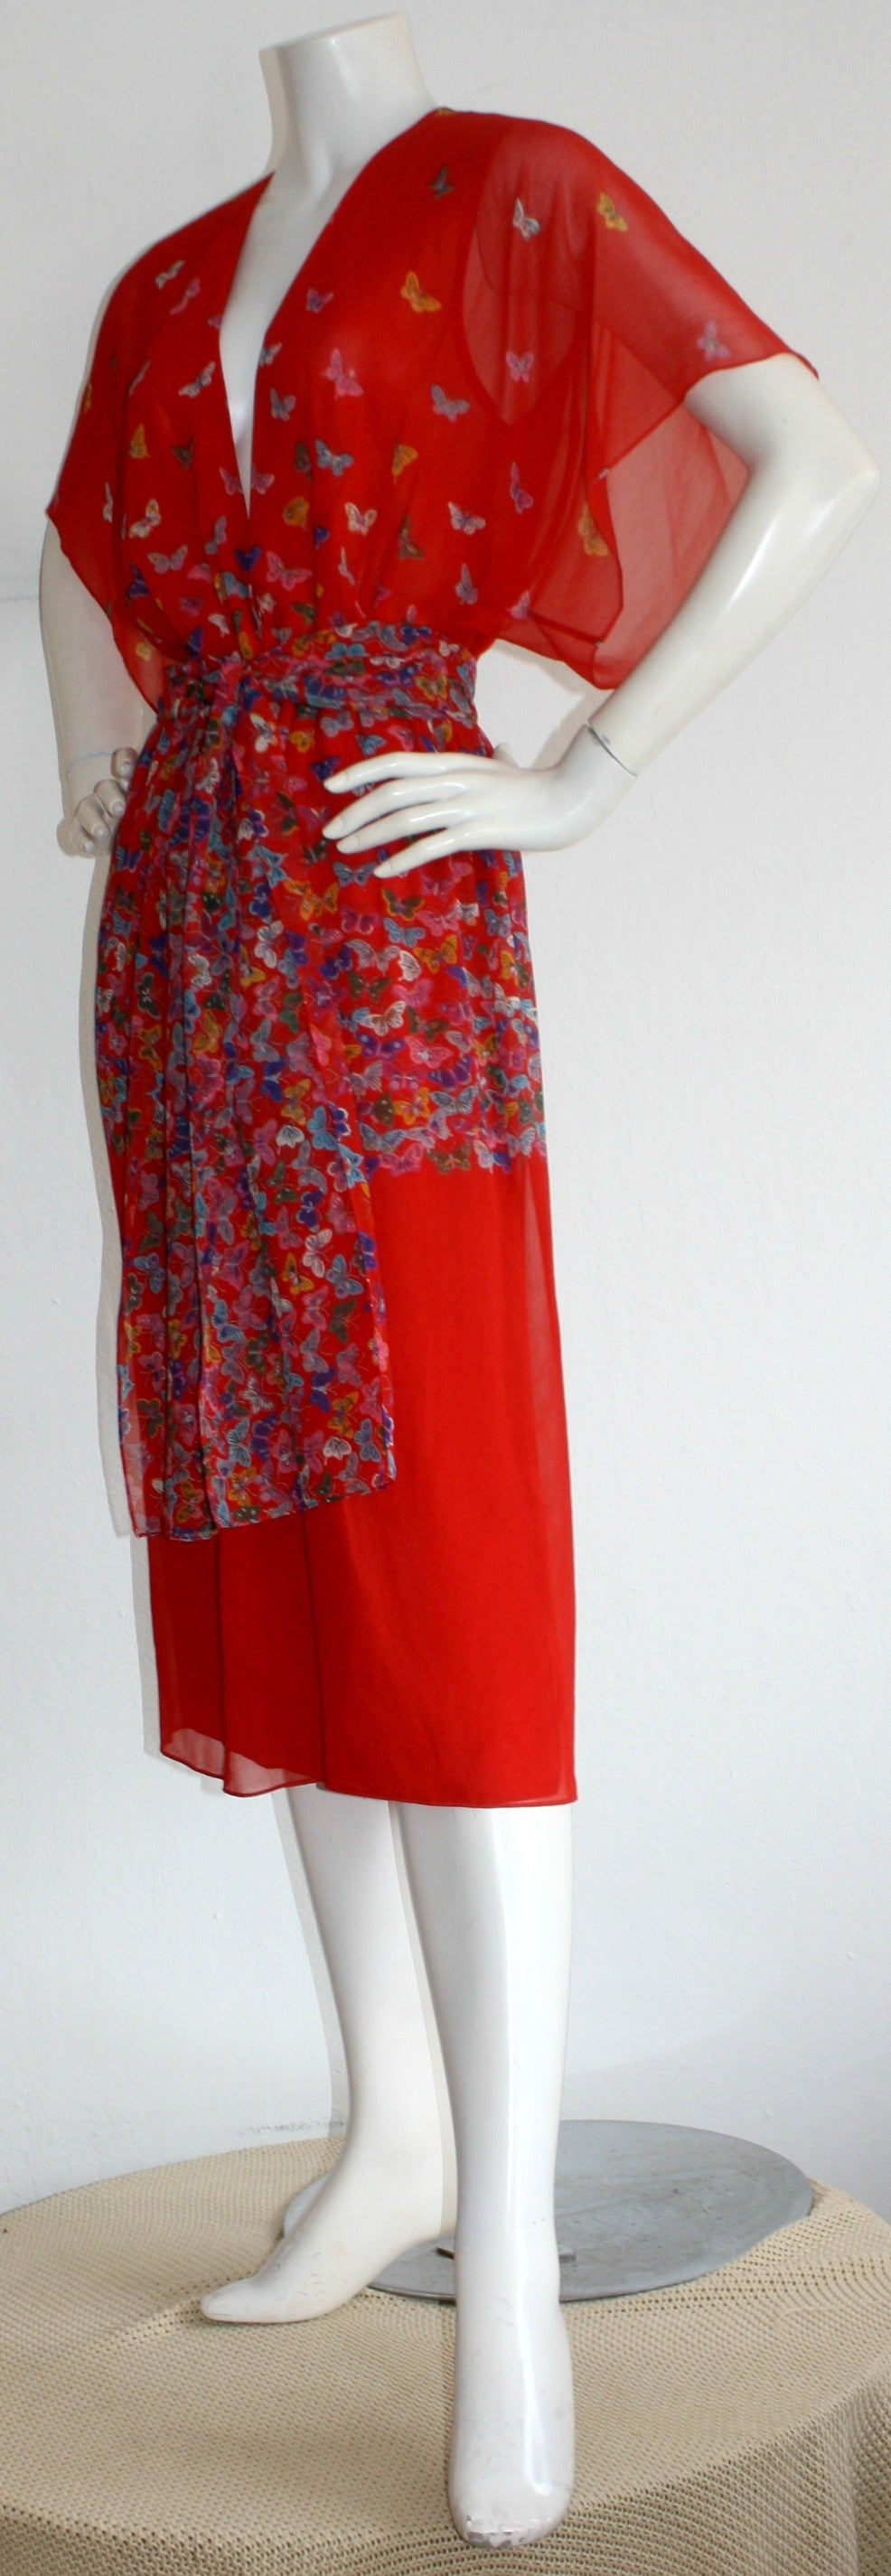 Whimsical vintage Hanae Mori red dress, with adorable butterfly prints throughout. Chic kimono-style, with plunging neckline. Easily goes from day to night. Sash also looks great wrapped around the head. In great condition. Approximately Size